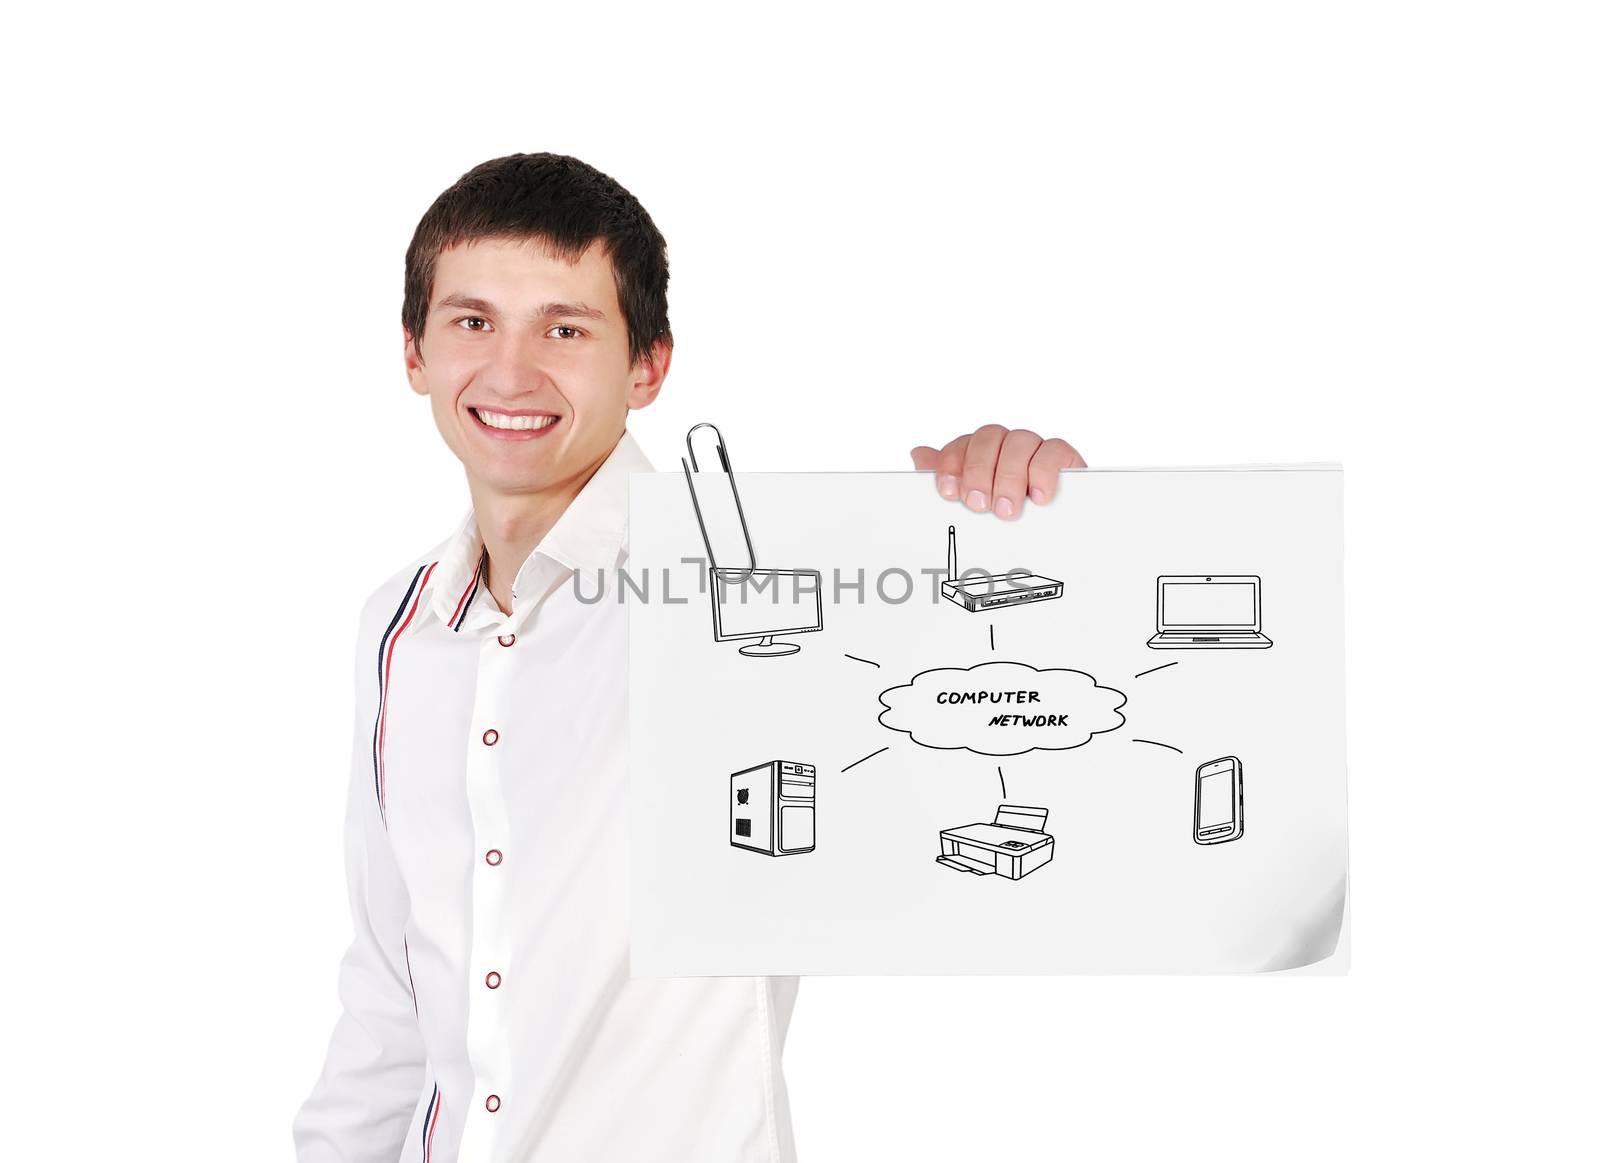 guy holding poster with computer network